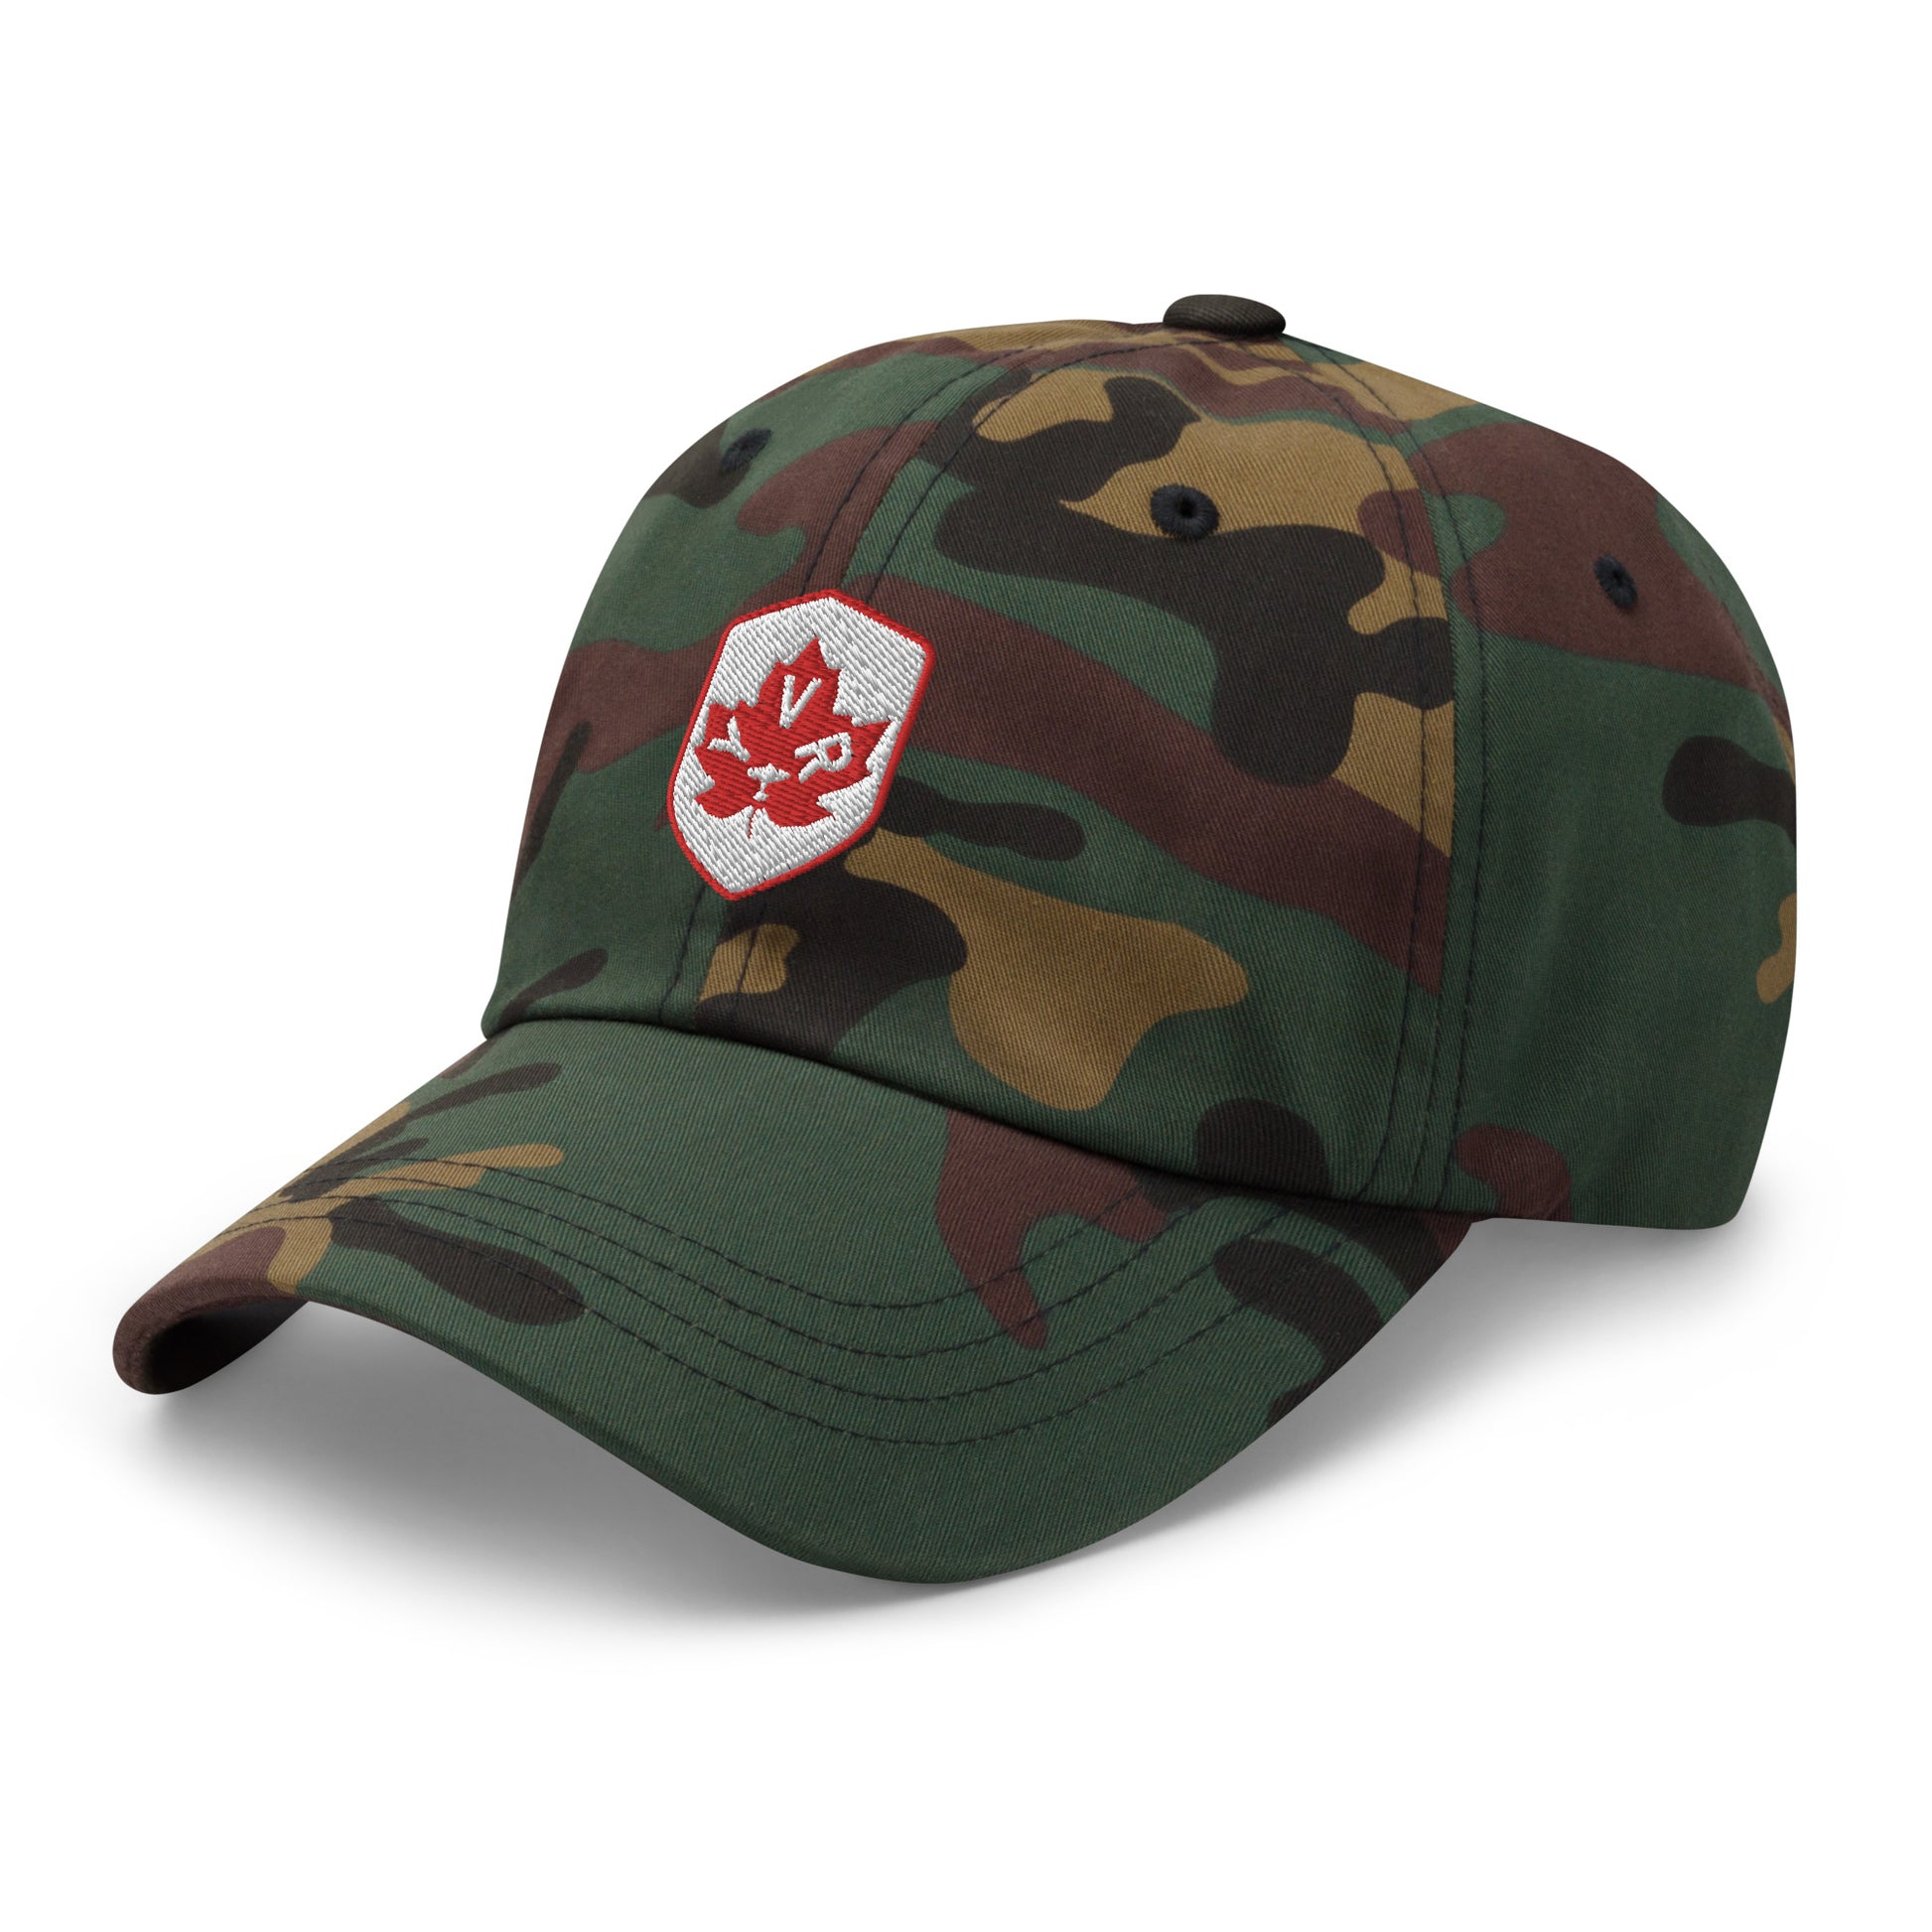 Maple Leaf Baseball Cap - Red/White • YVR Vancouver • YHM Designs - Image 20